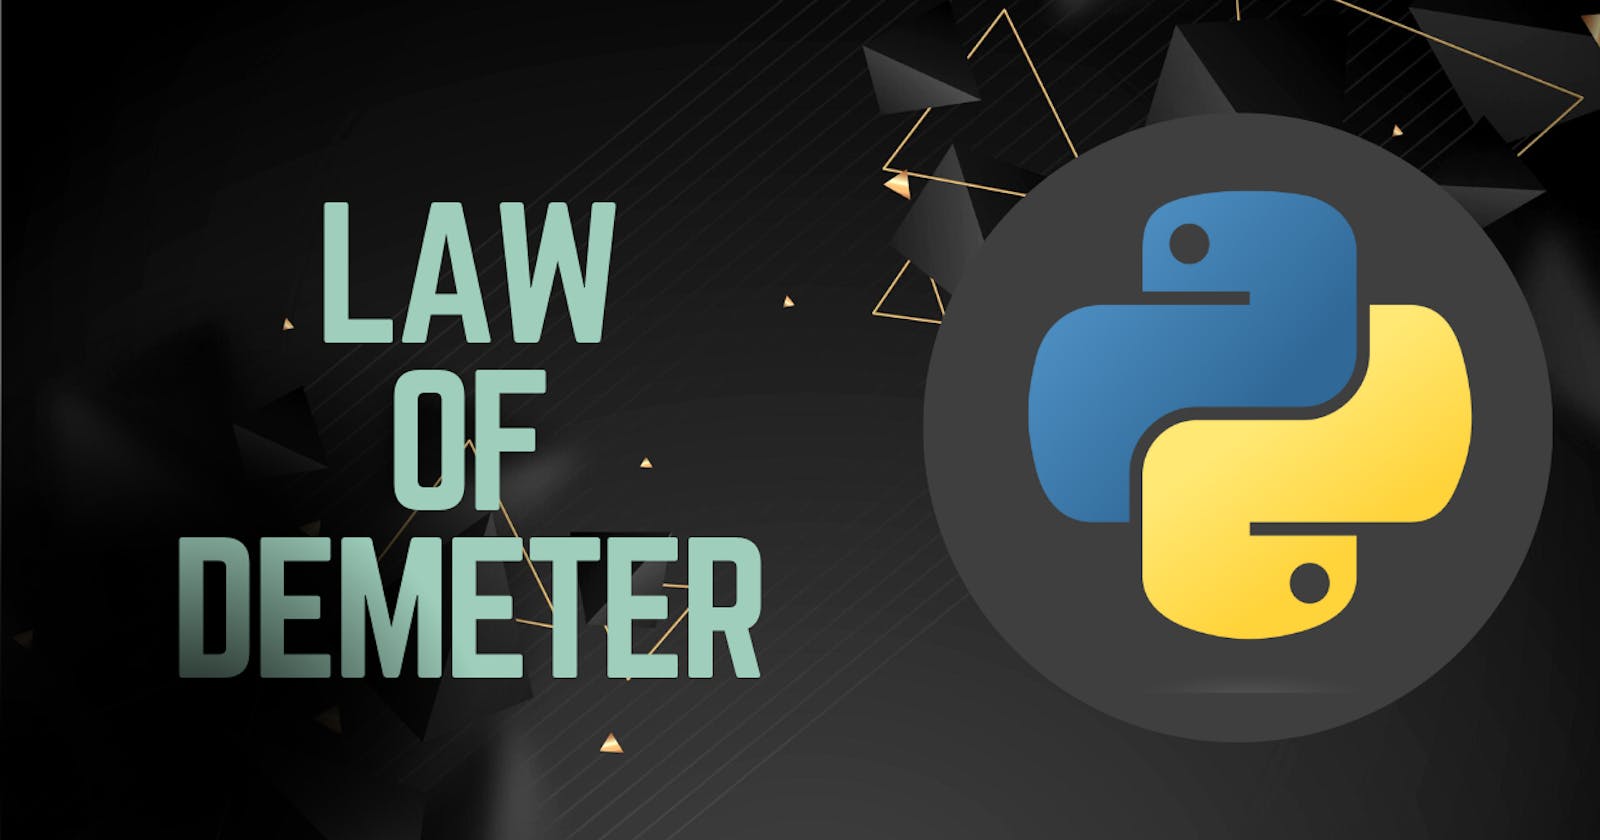 The Law of Demeter in Python